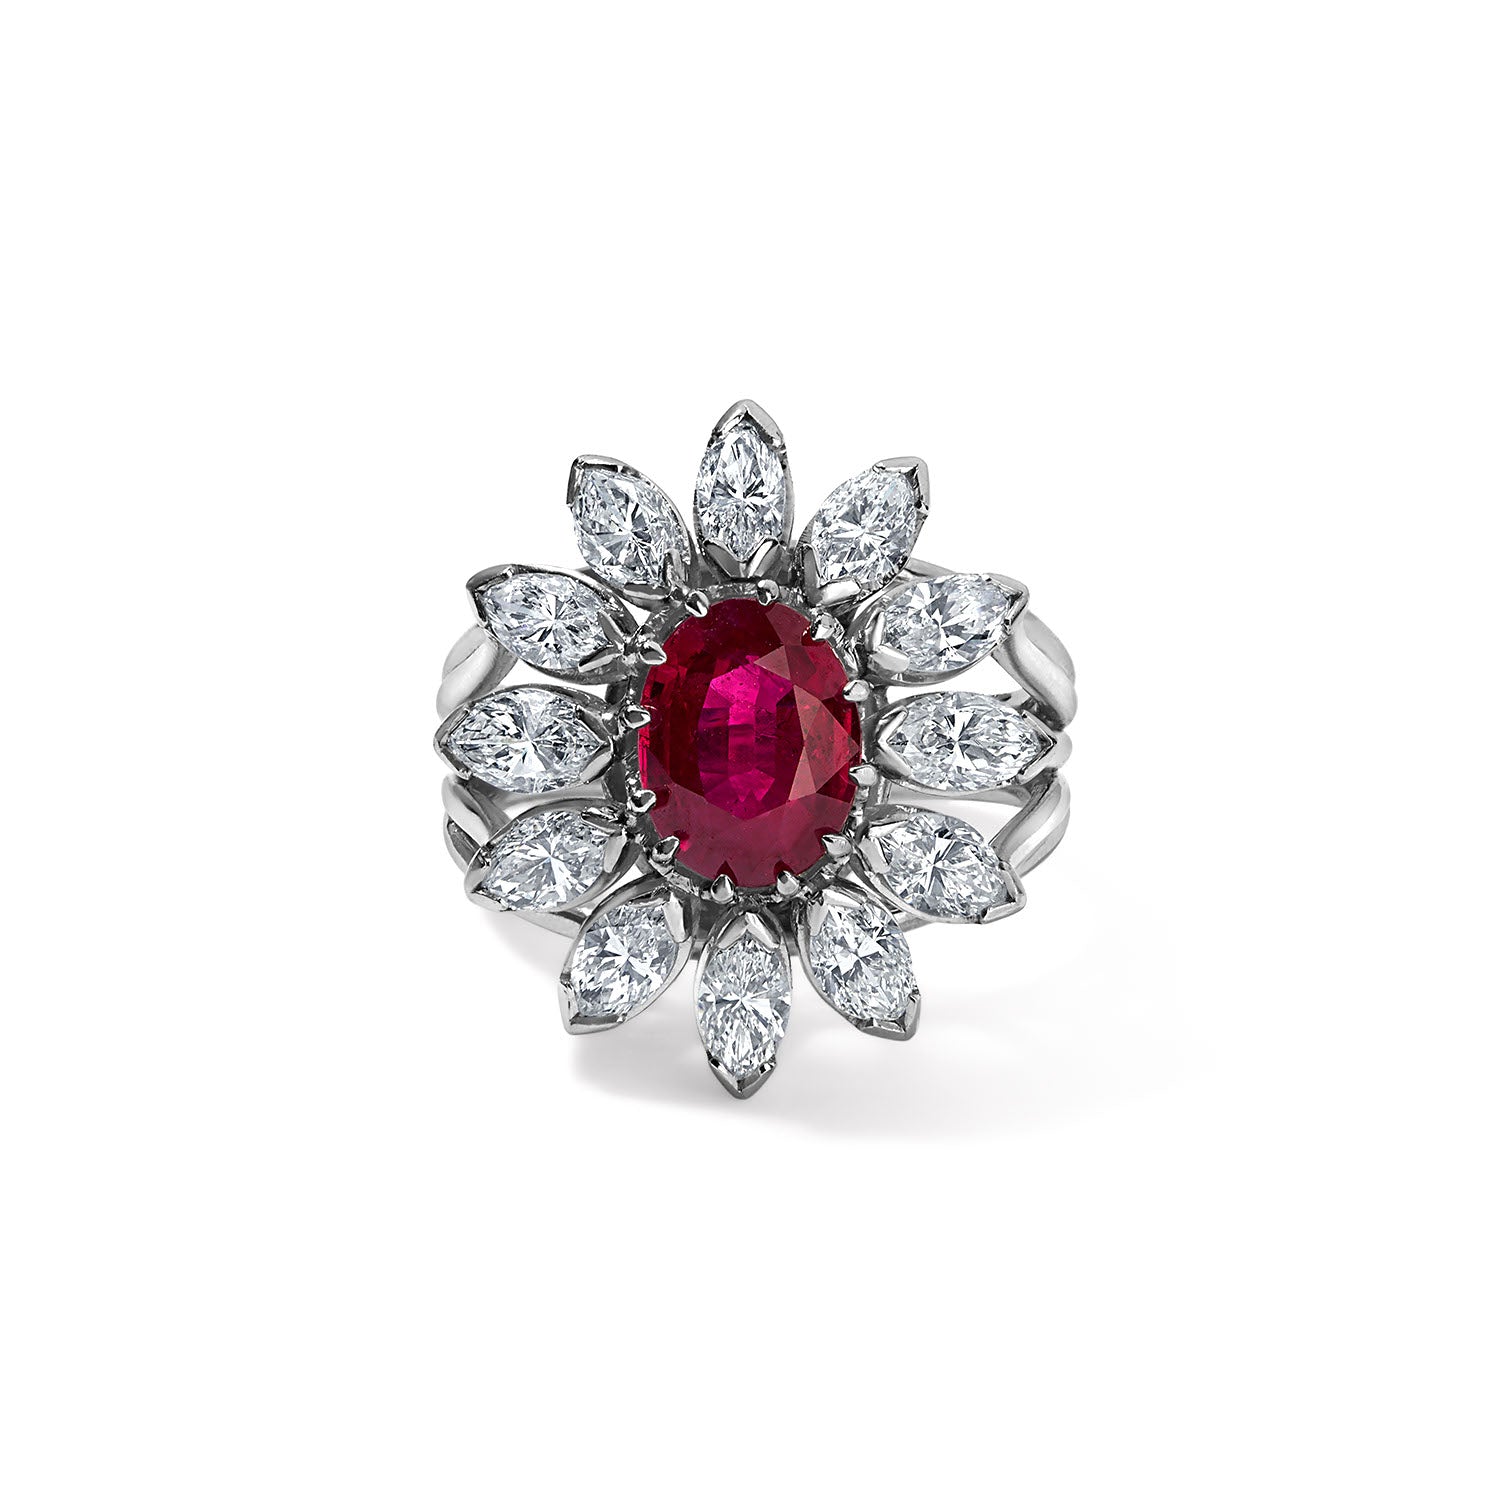 Vintage Diamond and Ruby Cocktail Ring